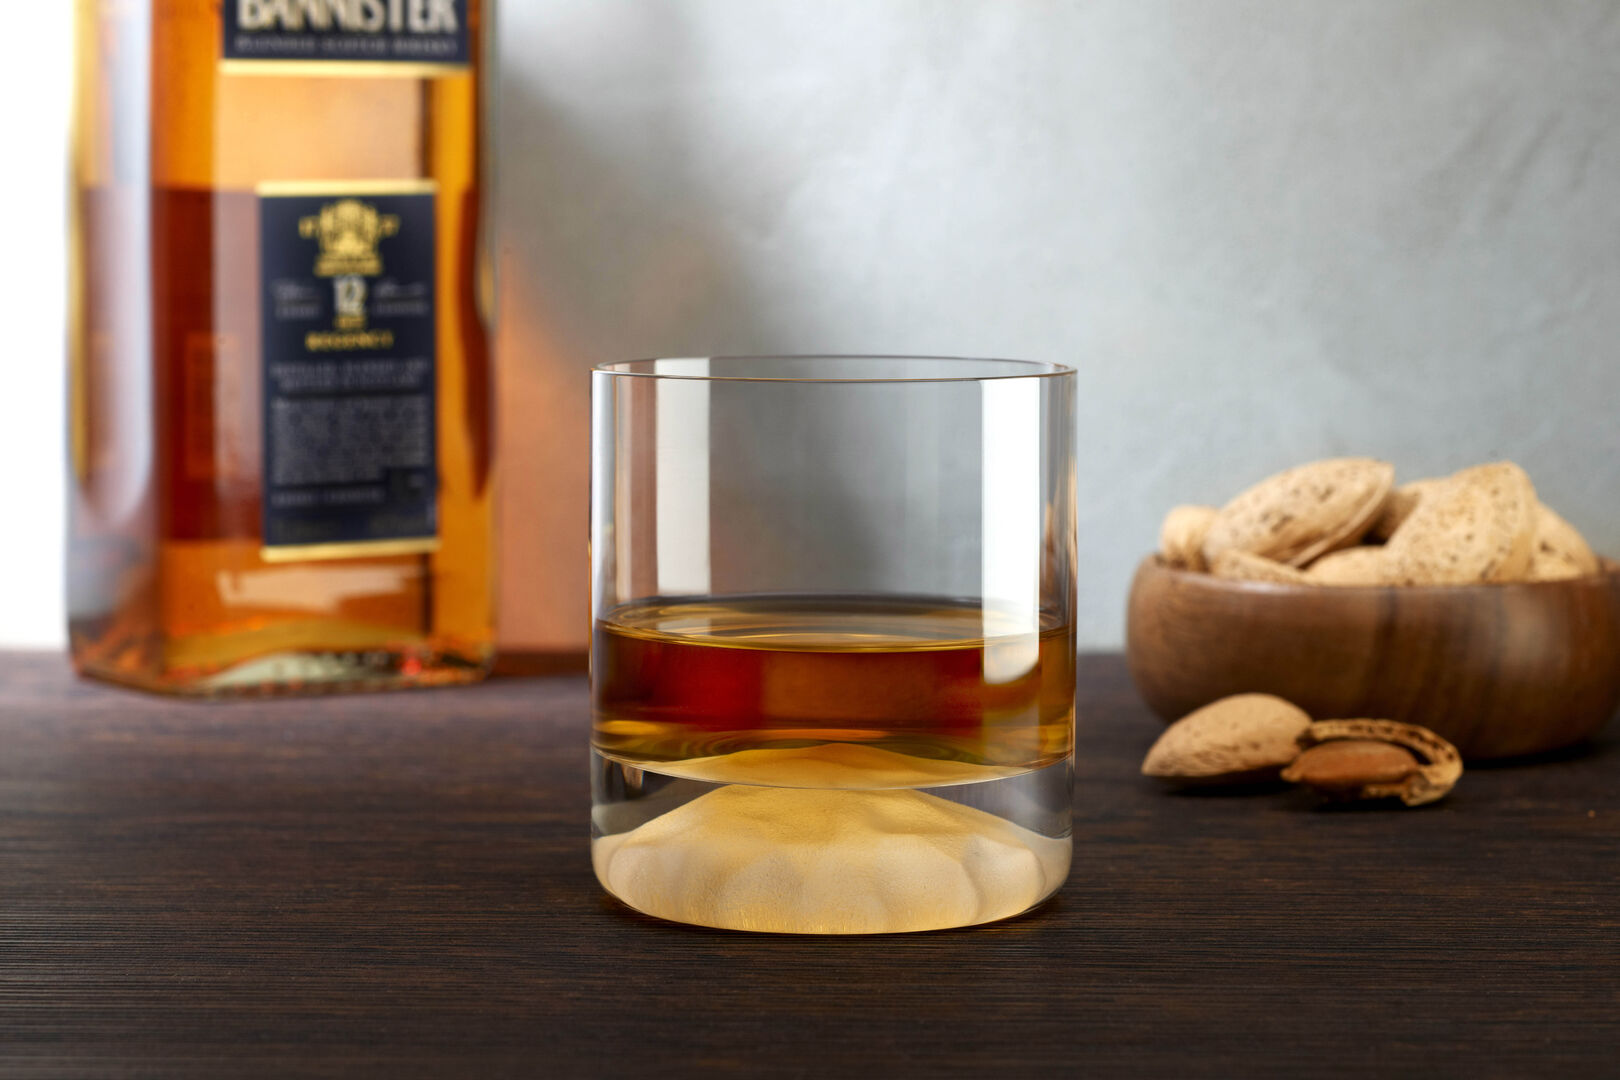 Cube ICE Whisky Tumbler with Whisky bottle in the background